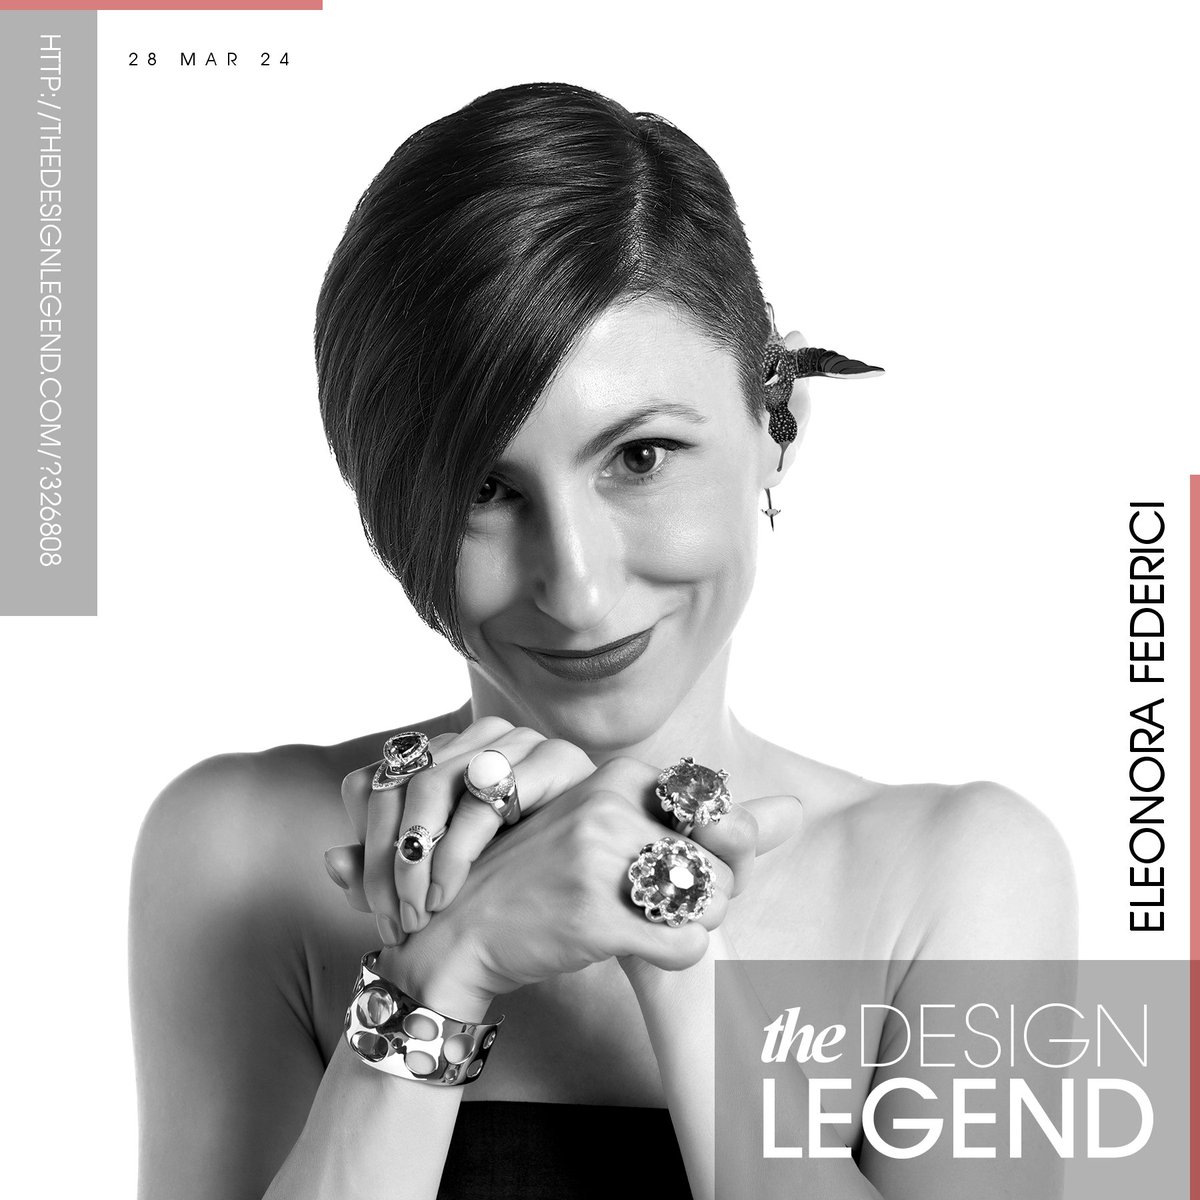 We are pleased to announce Eleonora Federici as the Design Legend of the Day of 28 March 2024. You can check our exclusive Design Legend interview with Eleonora Federici at thedesignlegend.com/?326808 #adesignaward #adesigncompetition #designlegend